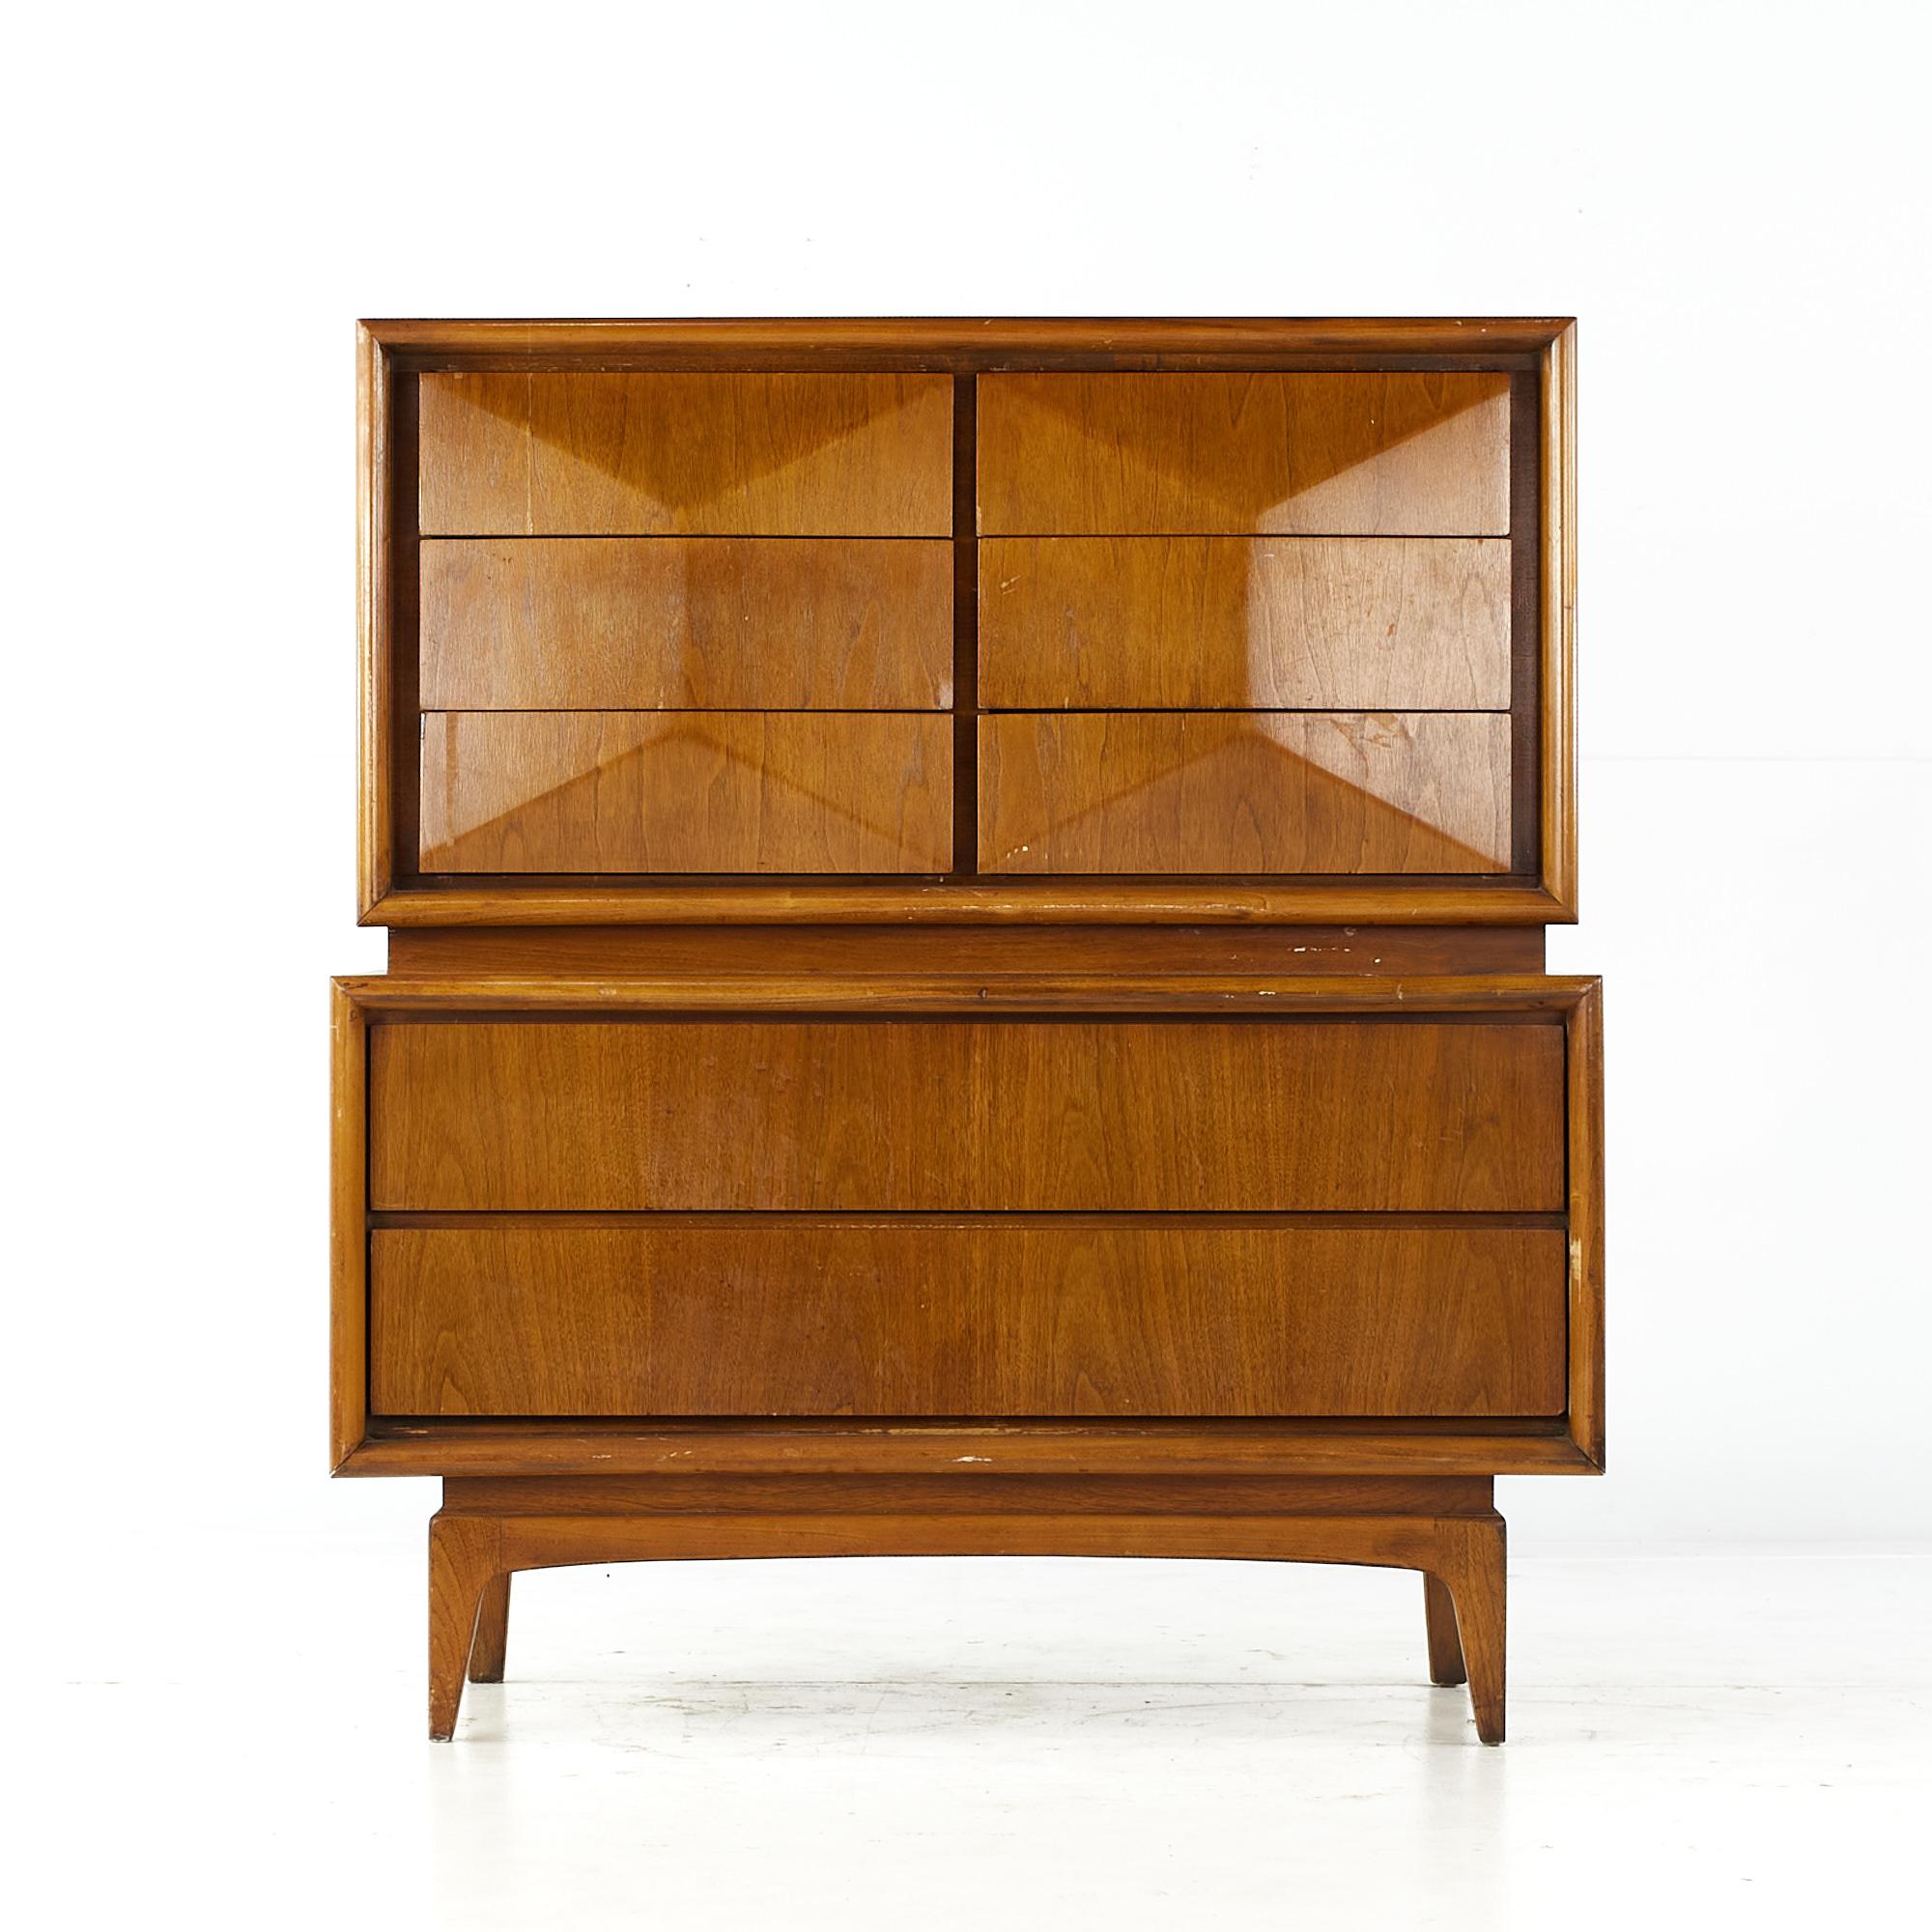 United Furniture Diamond mid century walnut highboy dresser

This highboy measures: 44 wide x 20 deep x 49.75 inches high

All pieces of furniture can be had in what we call restored vintage condition. That means the piece is restored upon